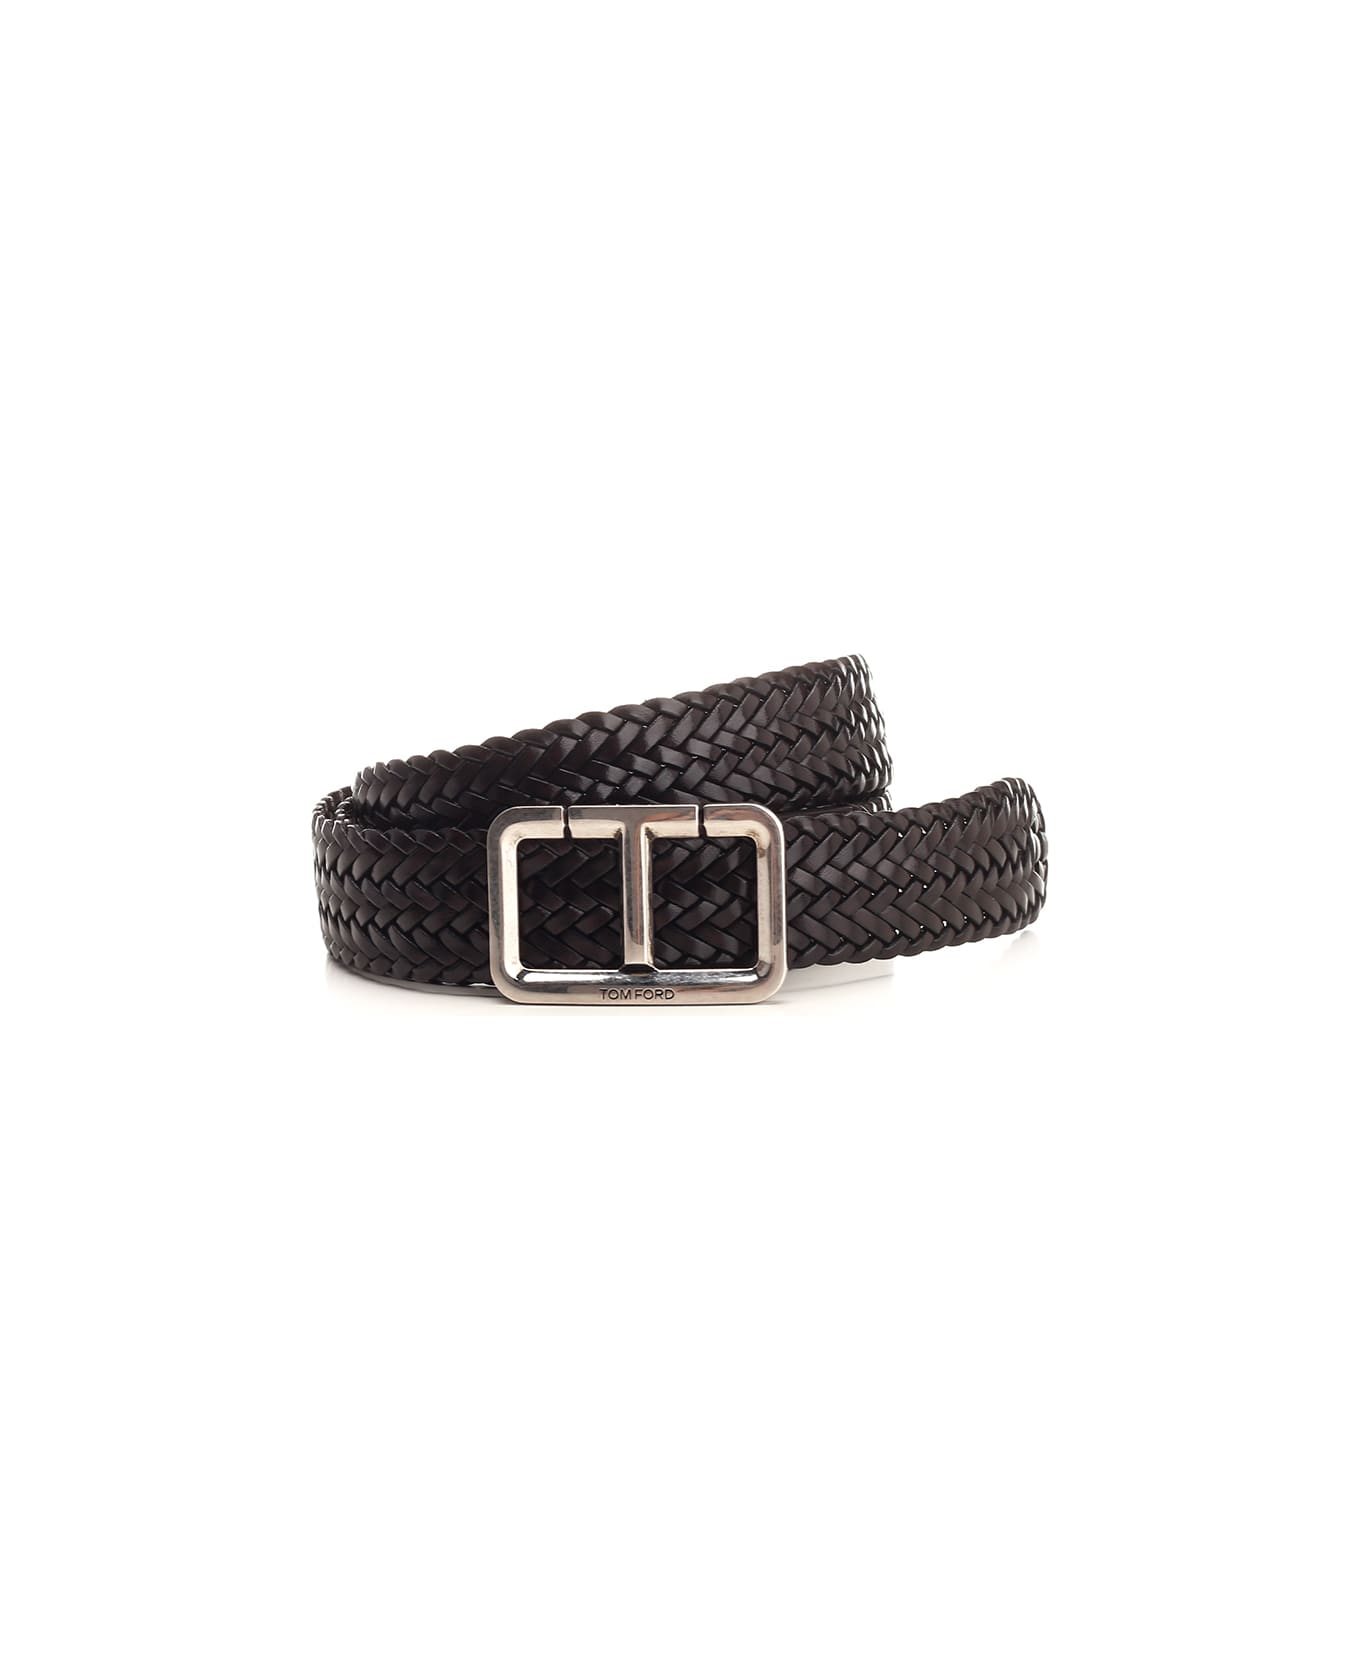 Tom Ford "t" Belt In Woven Leather - Brown